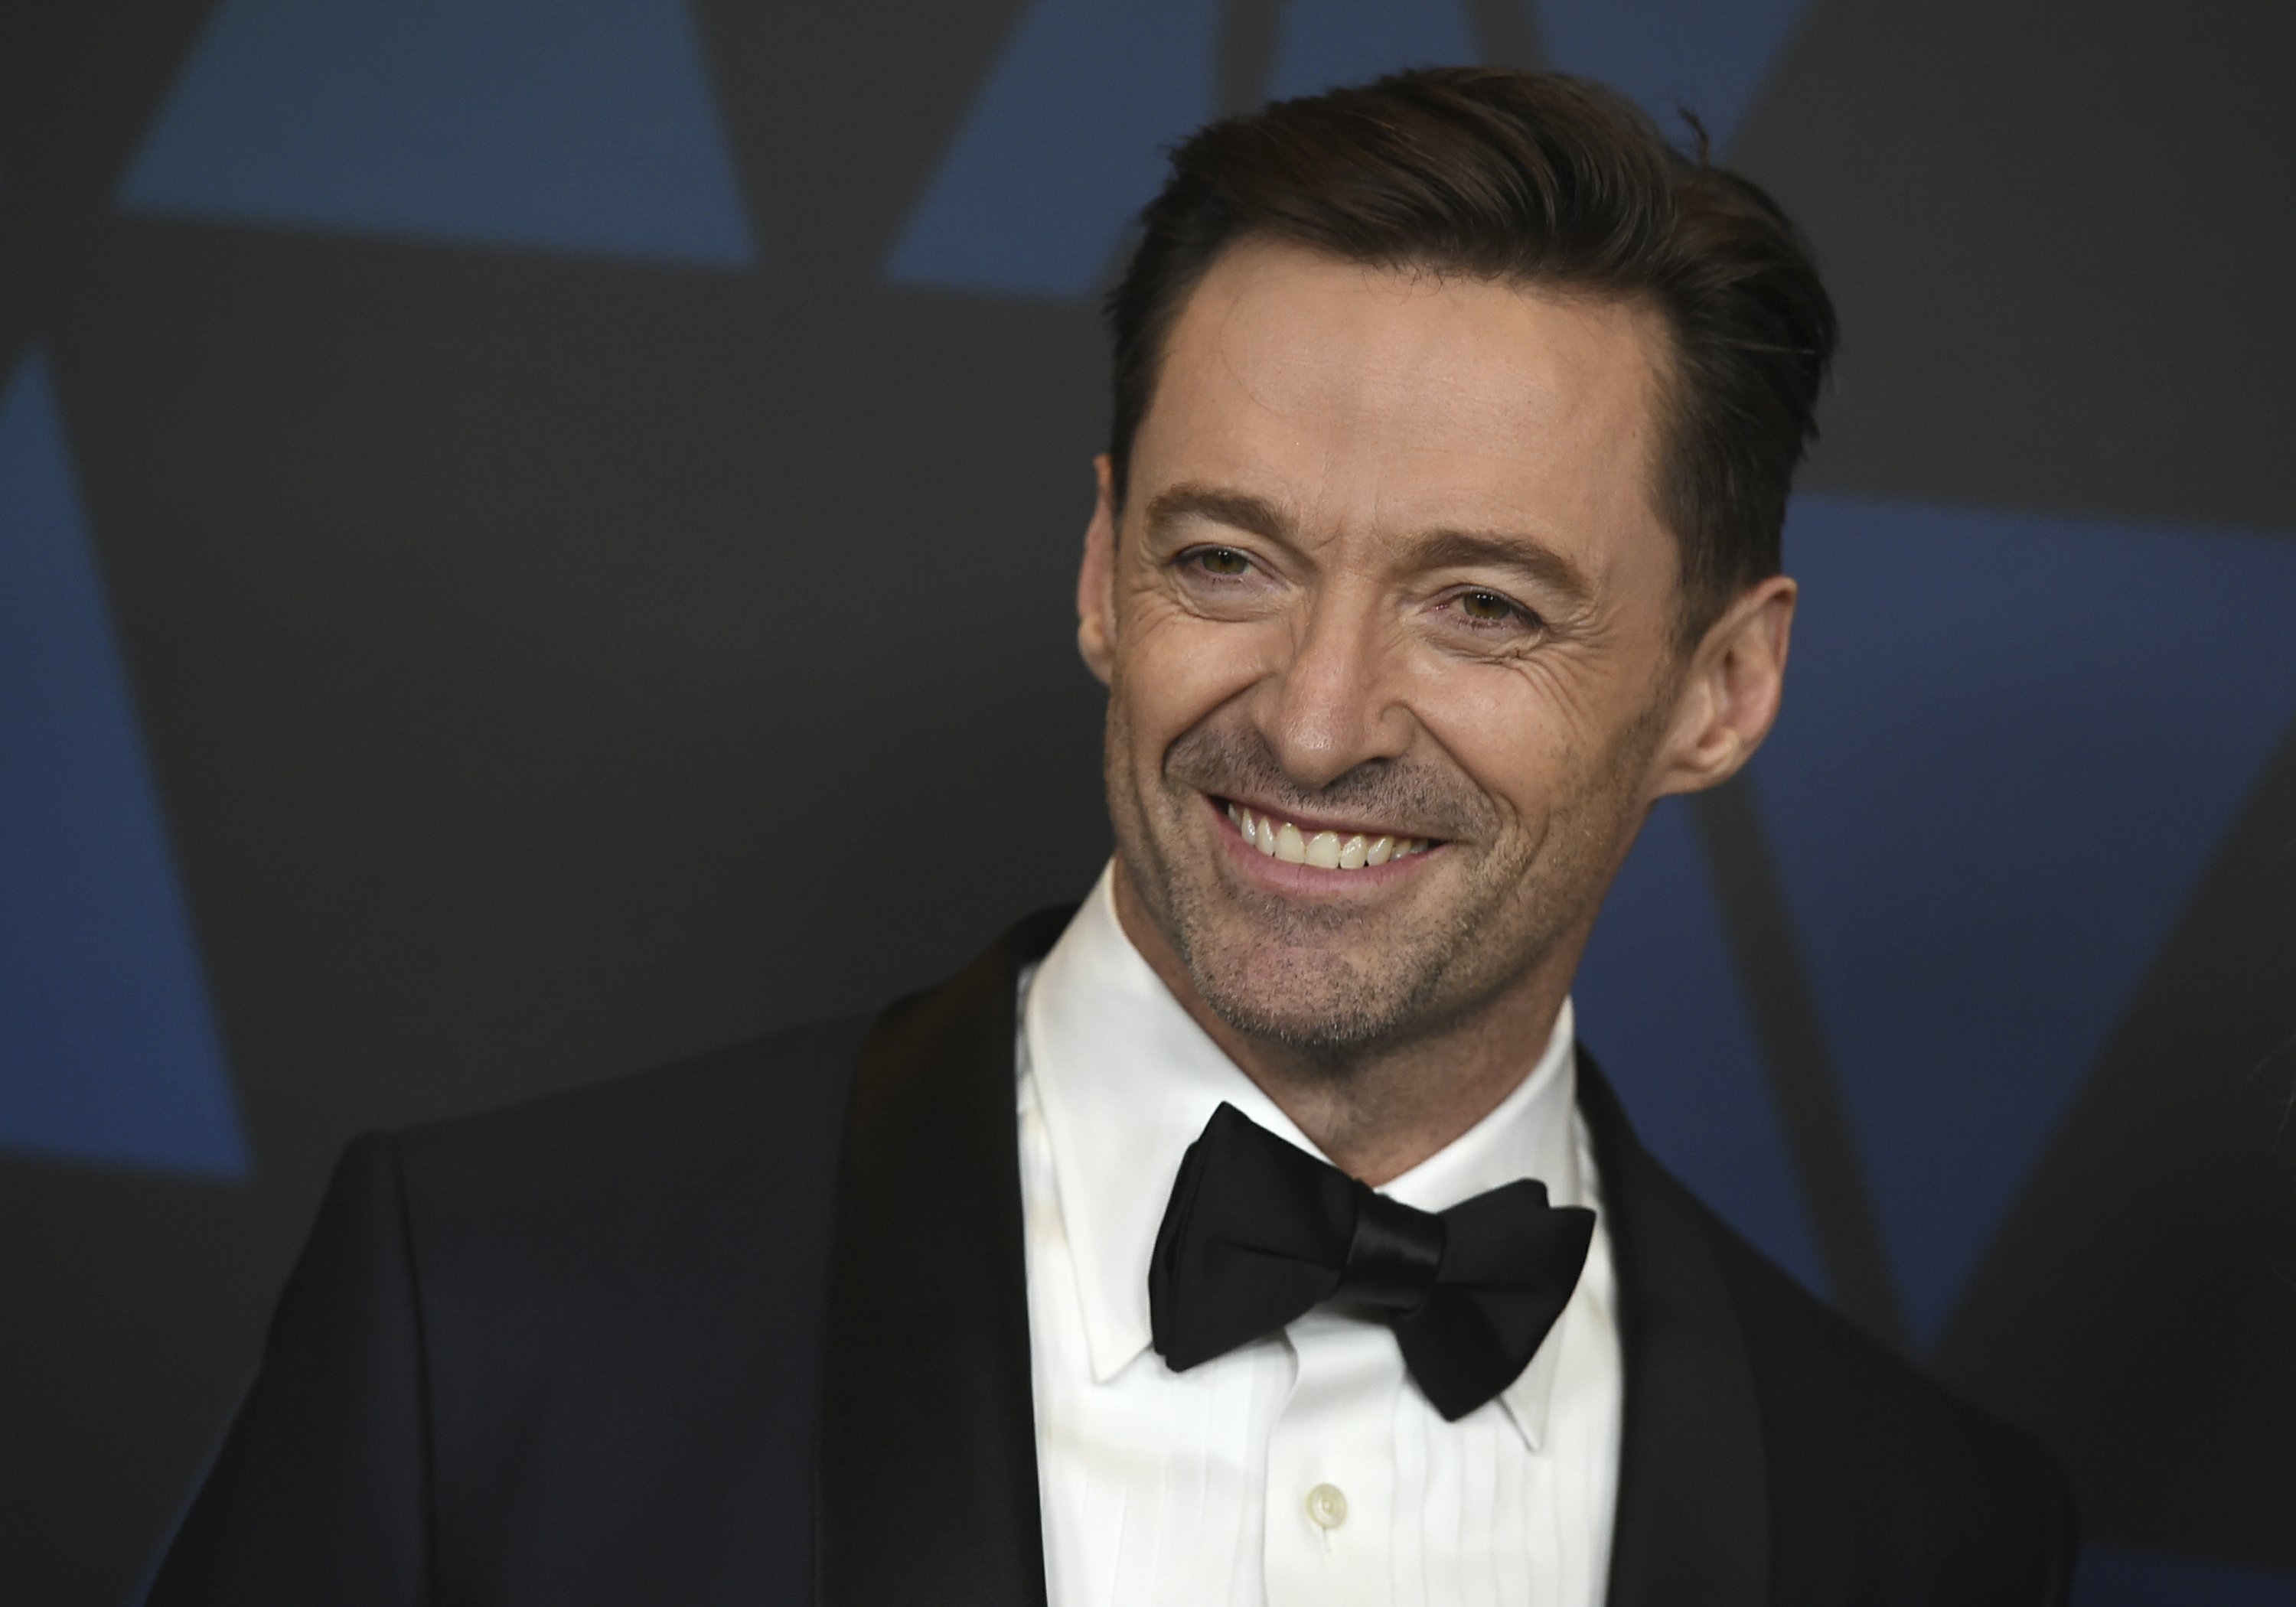 You will be able to hear Hugh Jackman sing on tour next year AP News